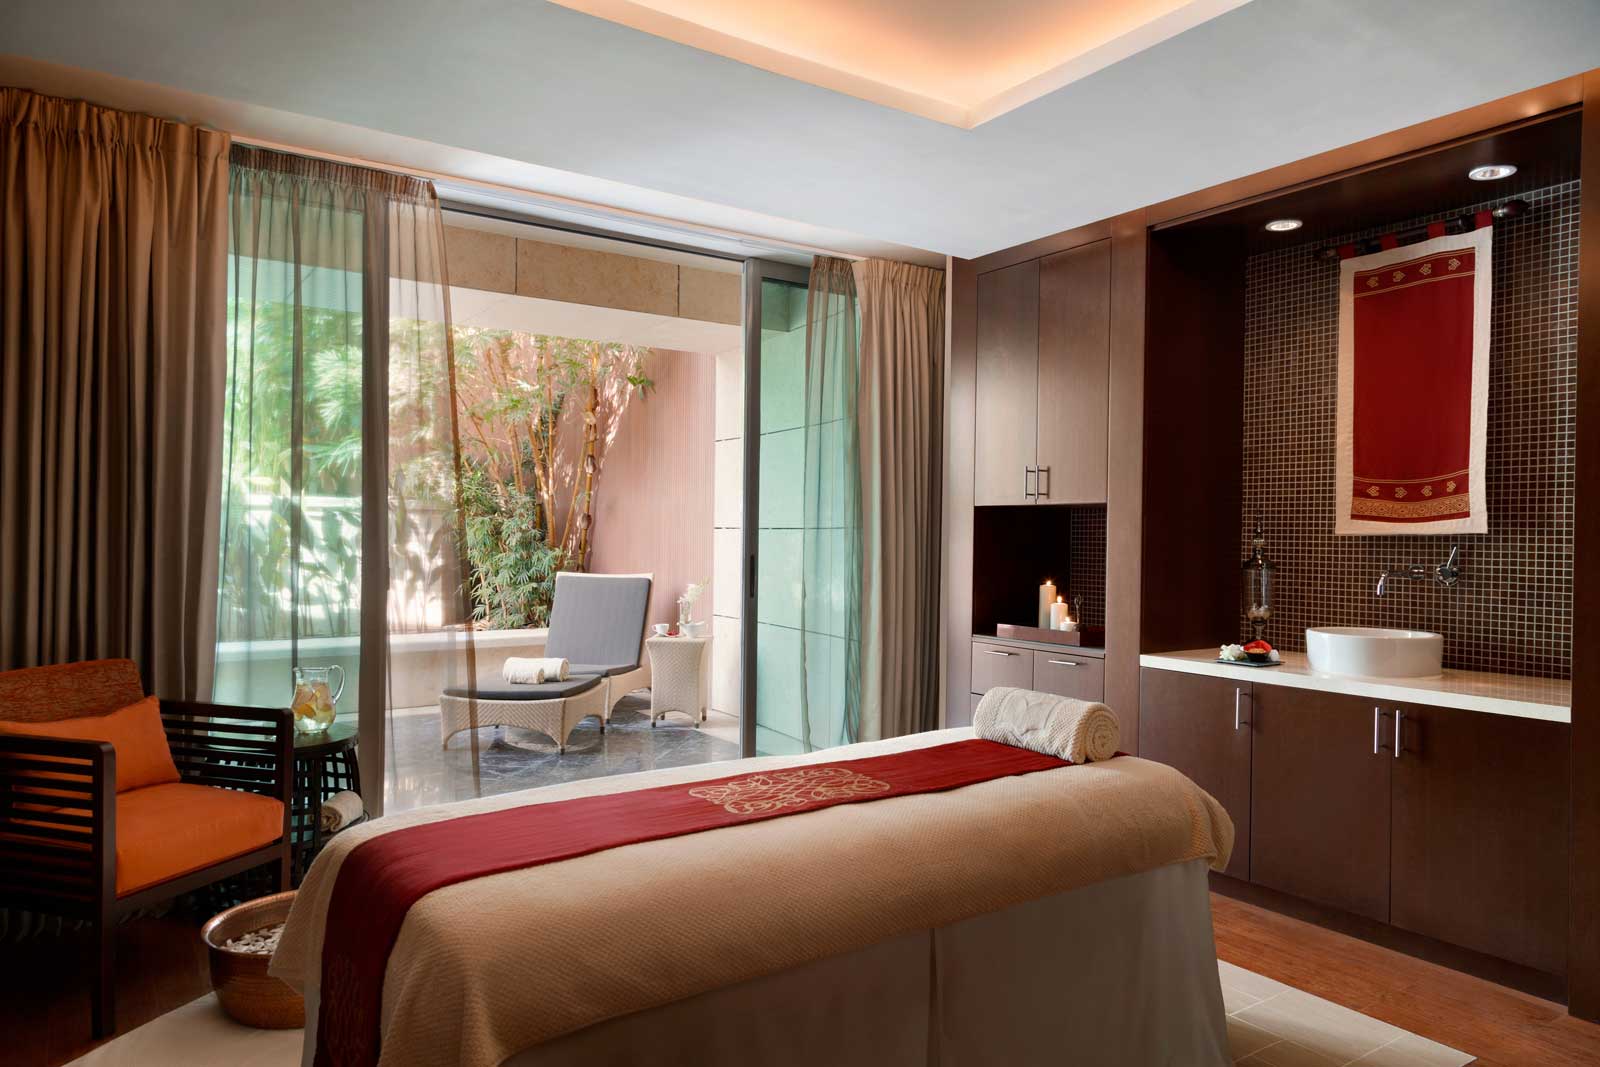 One of the spa rooms at the new Shangri-La, Doha